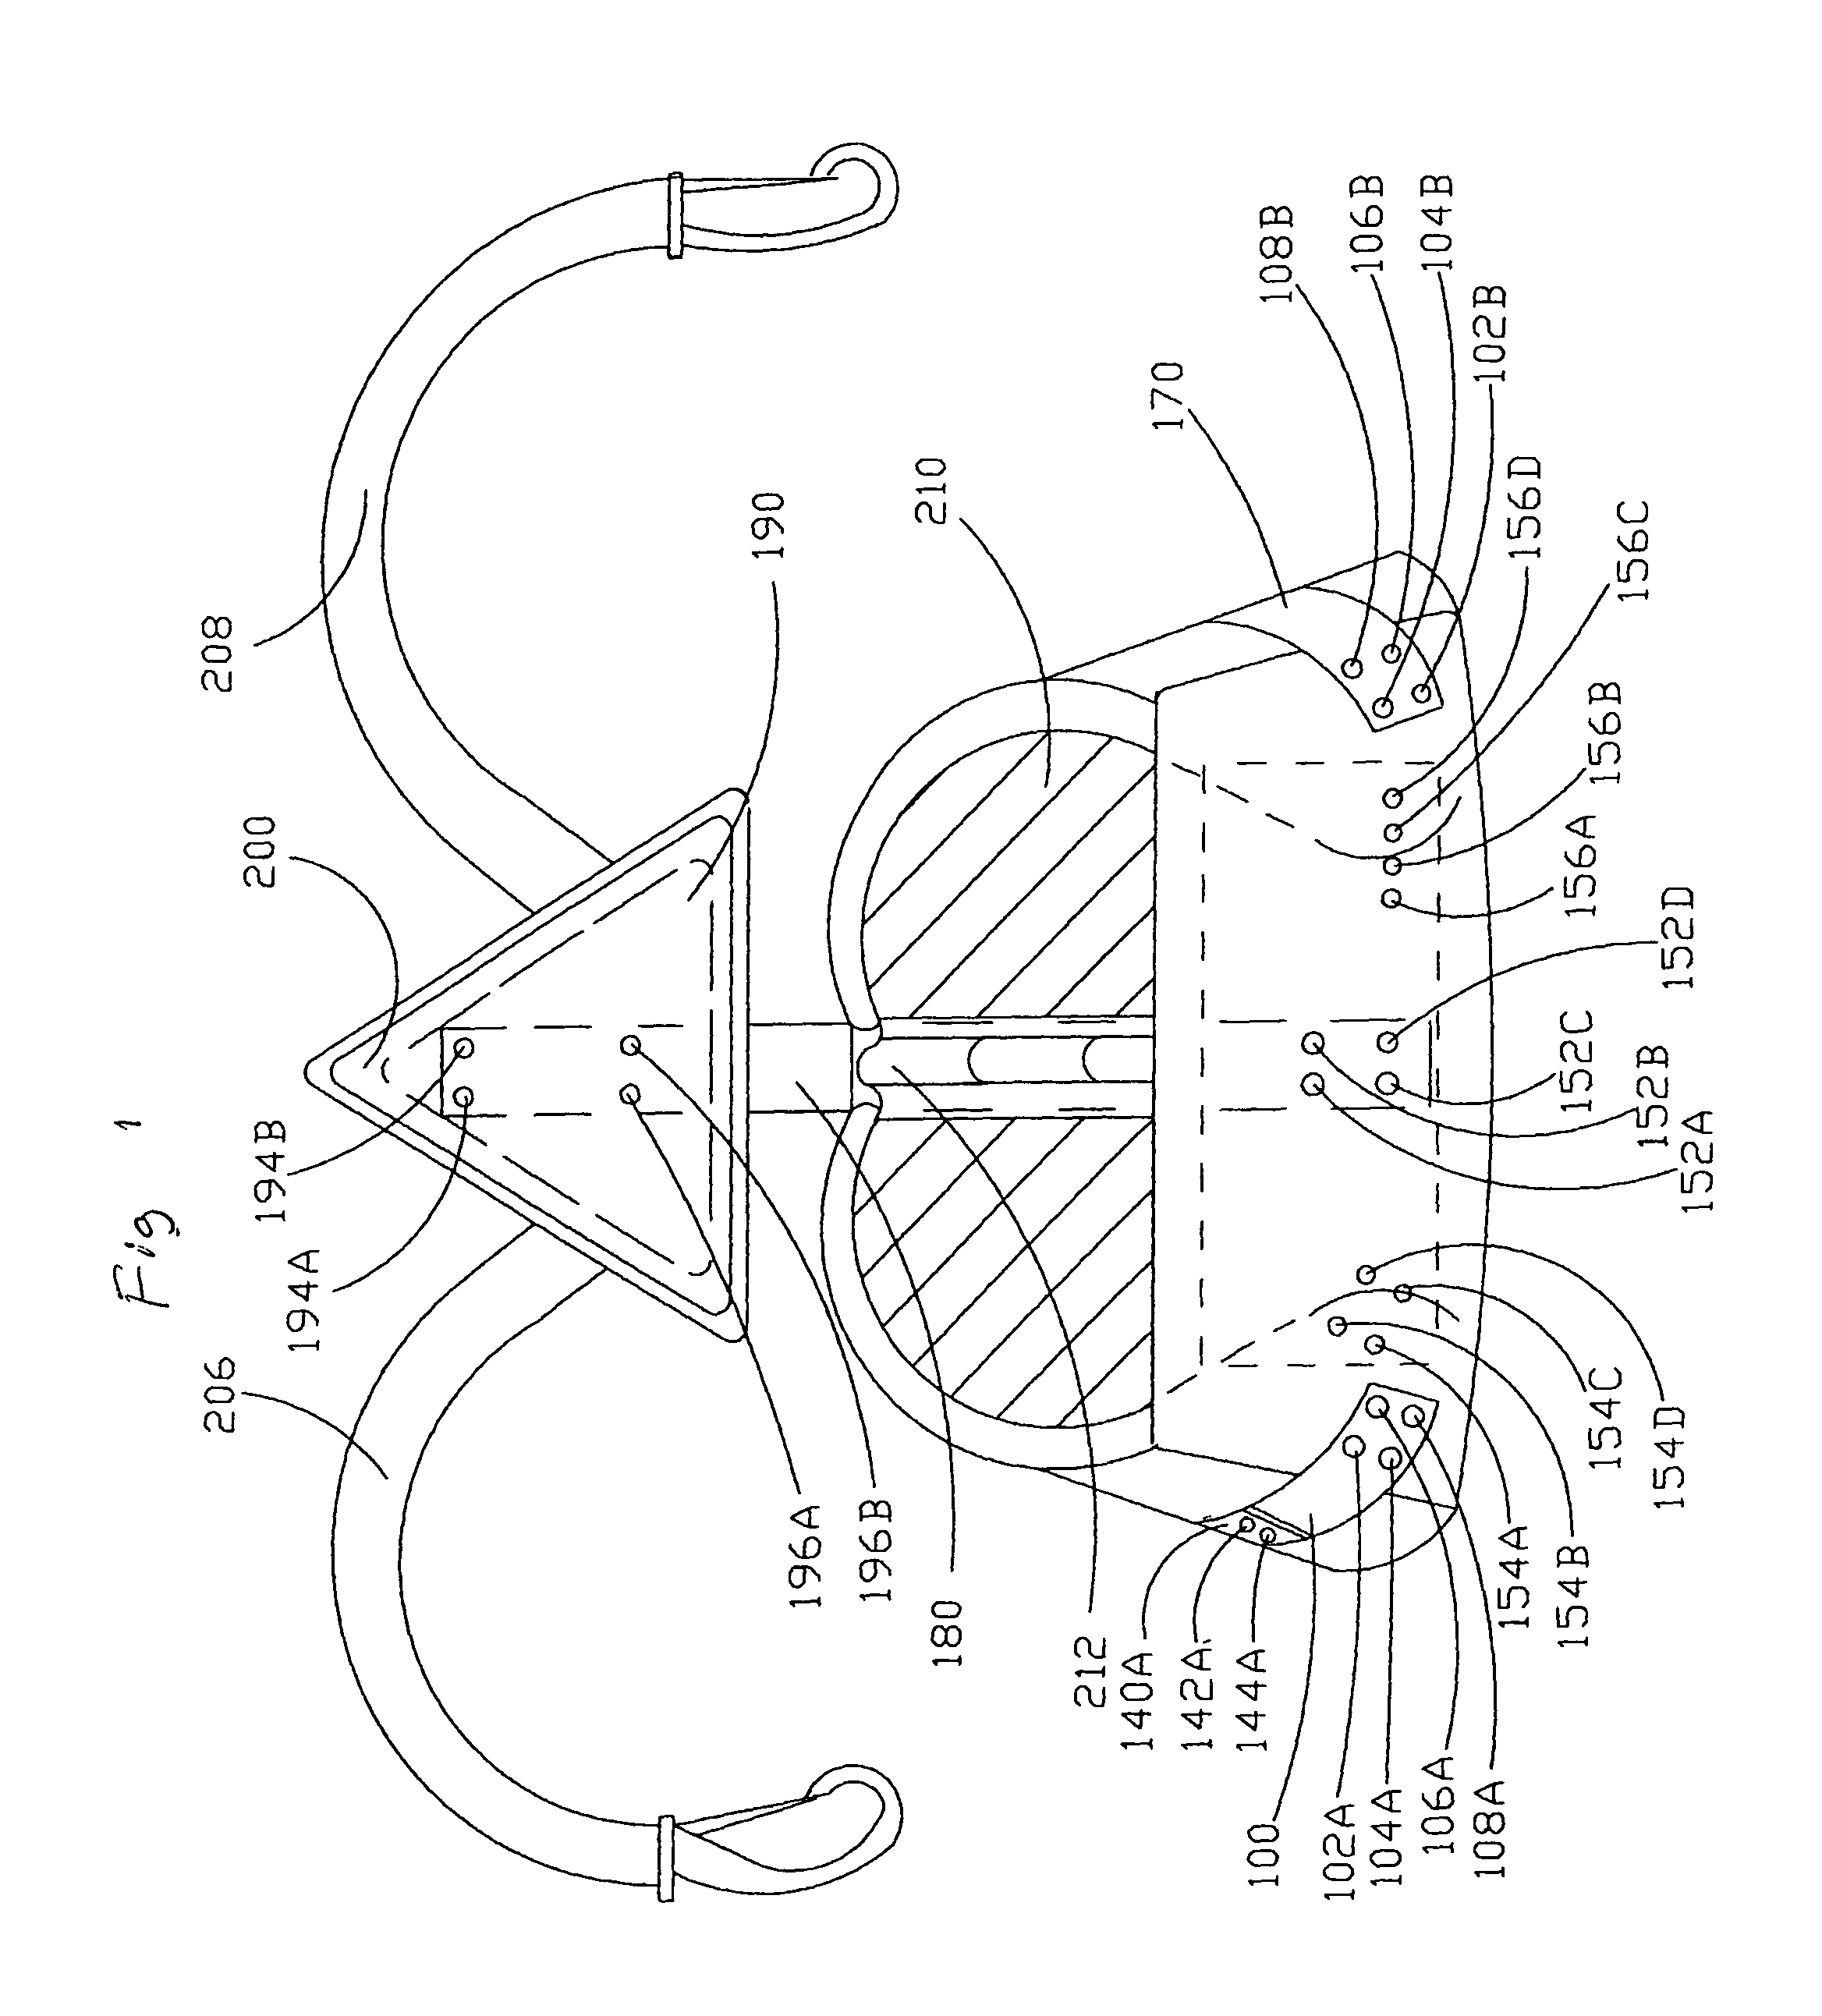 Apparatus for using a person's hips to carry the load of marching percussion equipment or other objects which are carried near waist-height and in front of a person